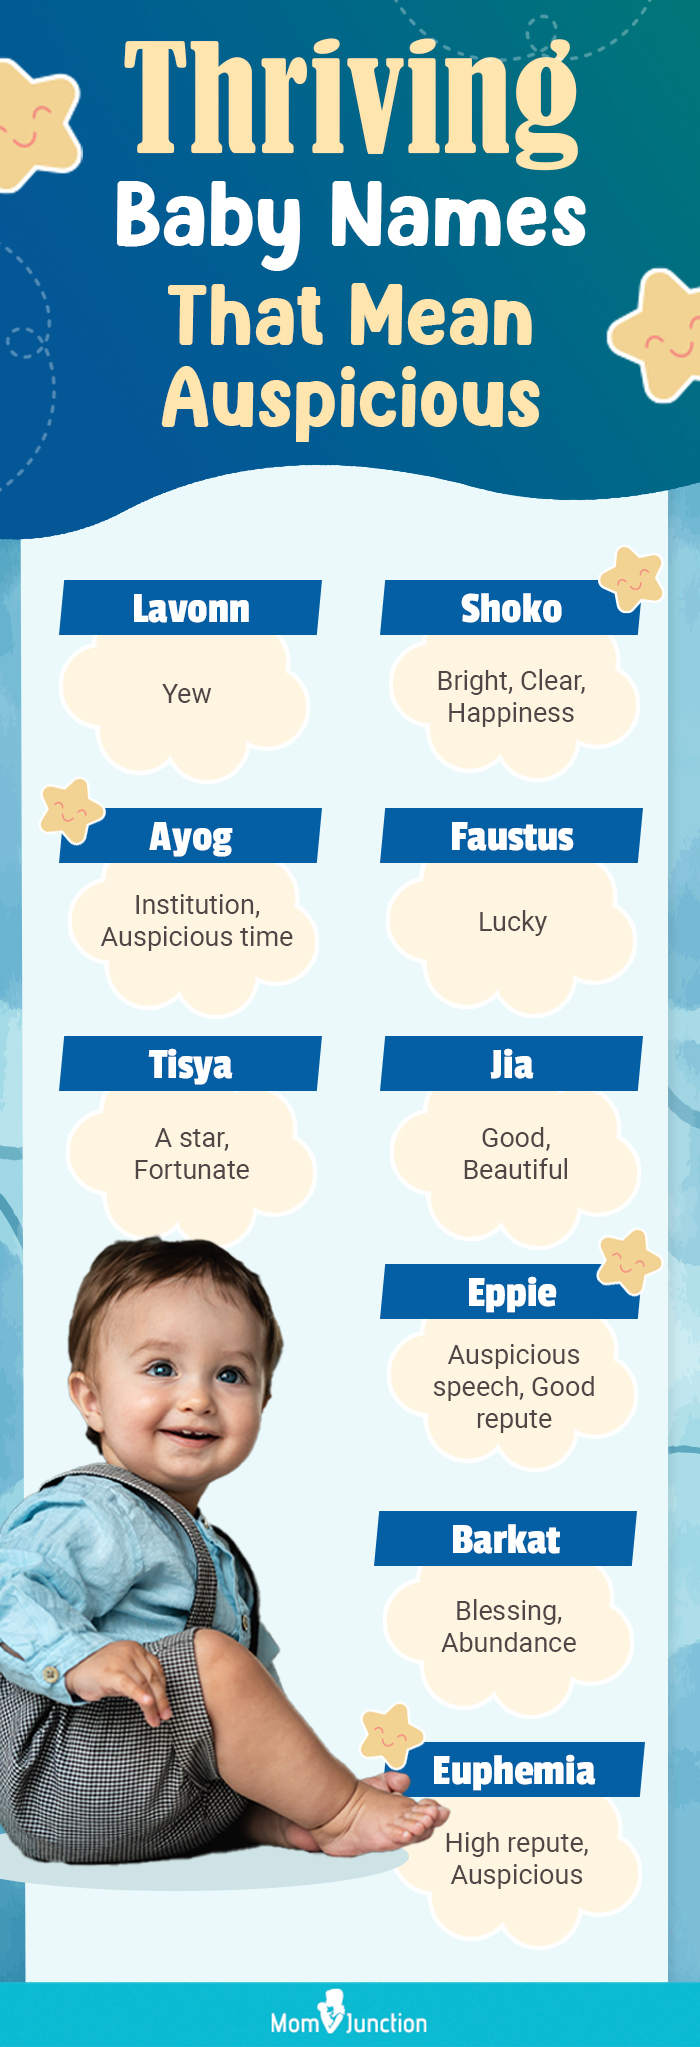 thriving baby names that mean auspicious (infographic)